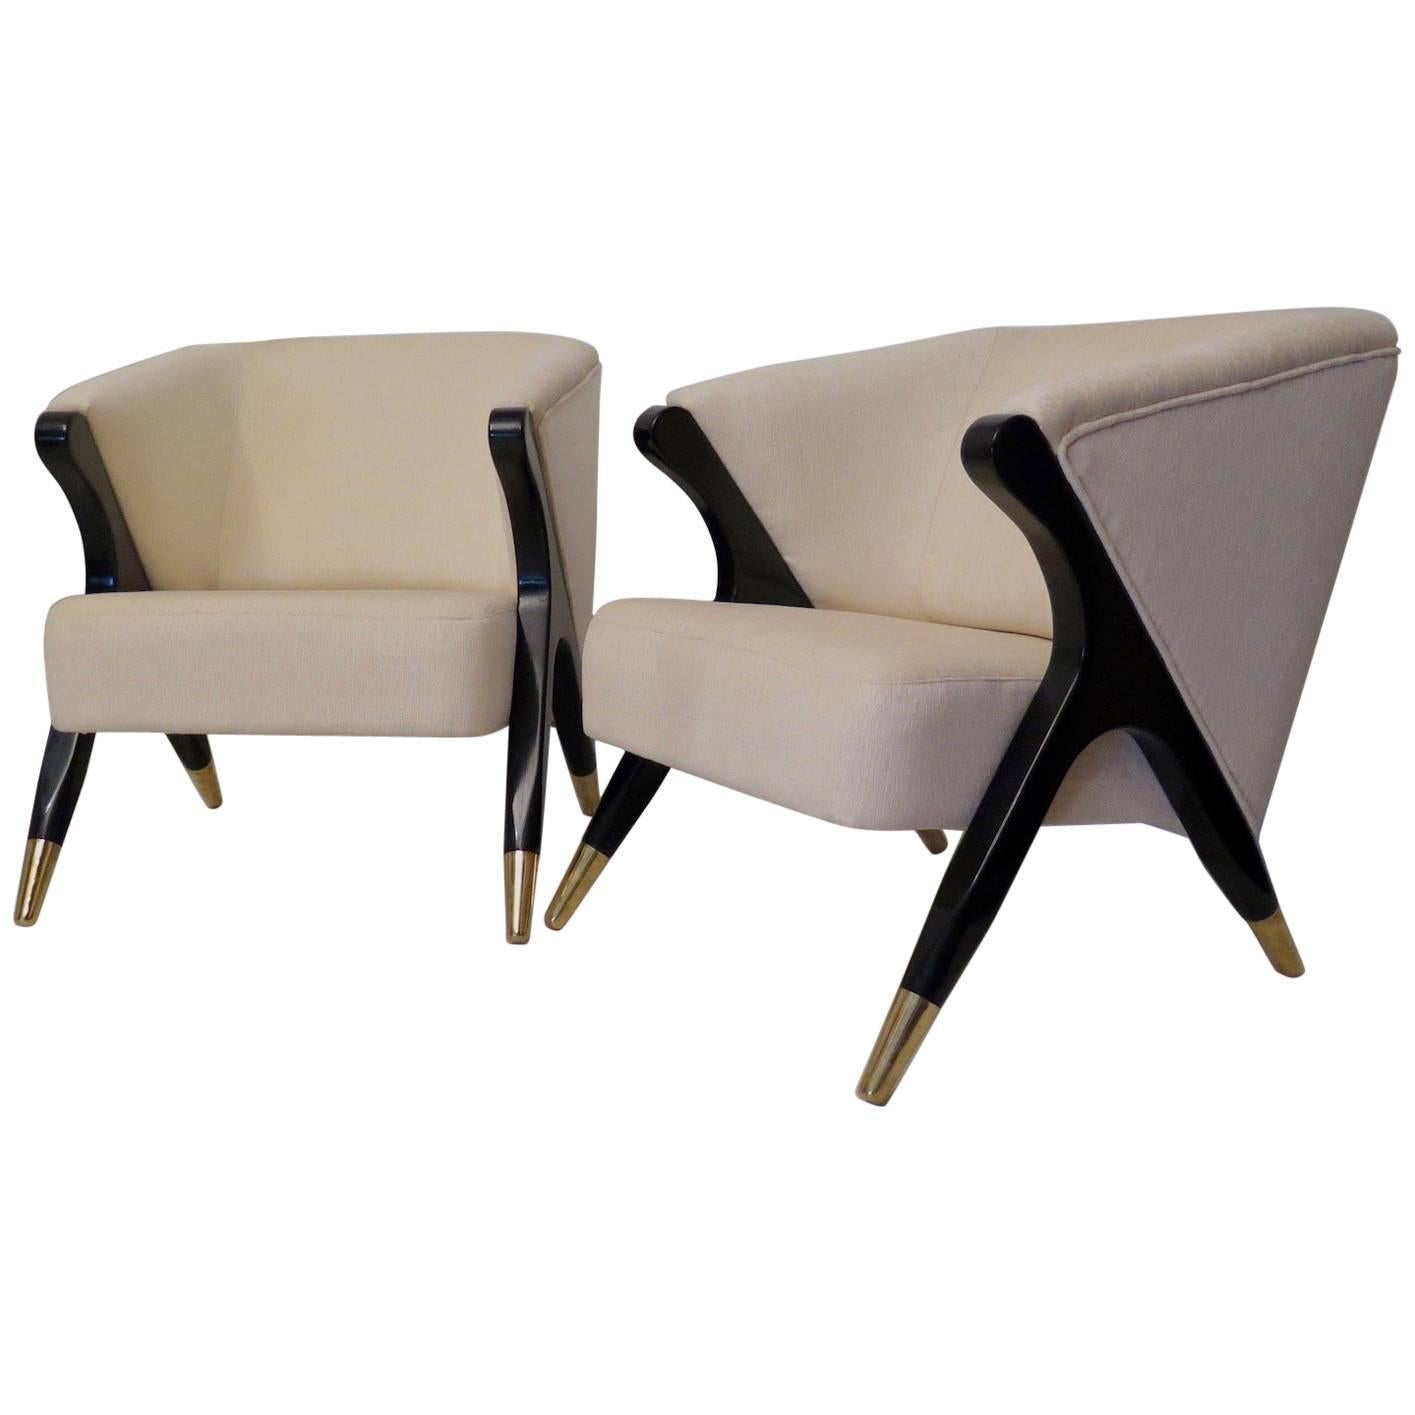 Two Art Deco Armchairs, Italy, 1930s